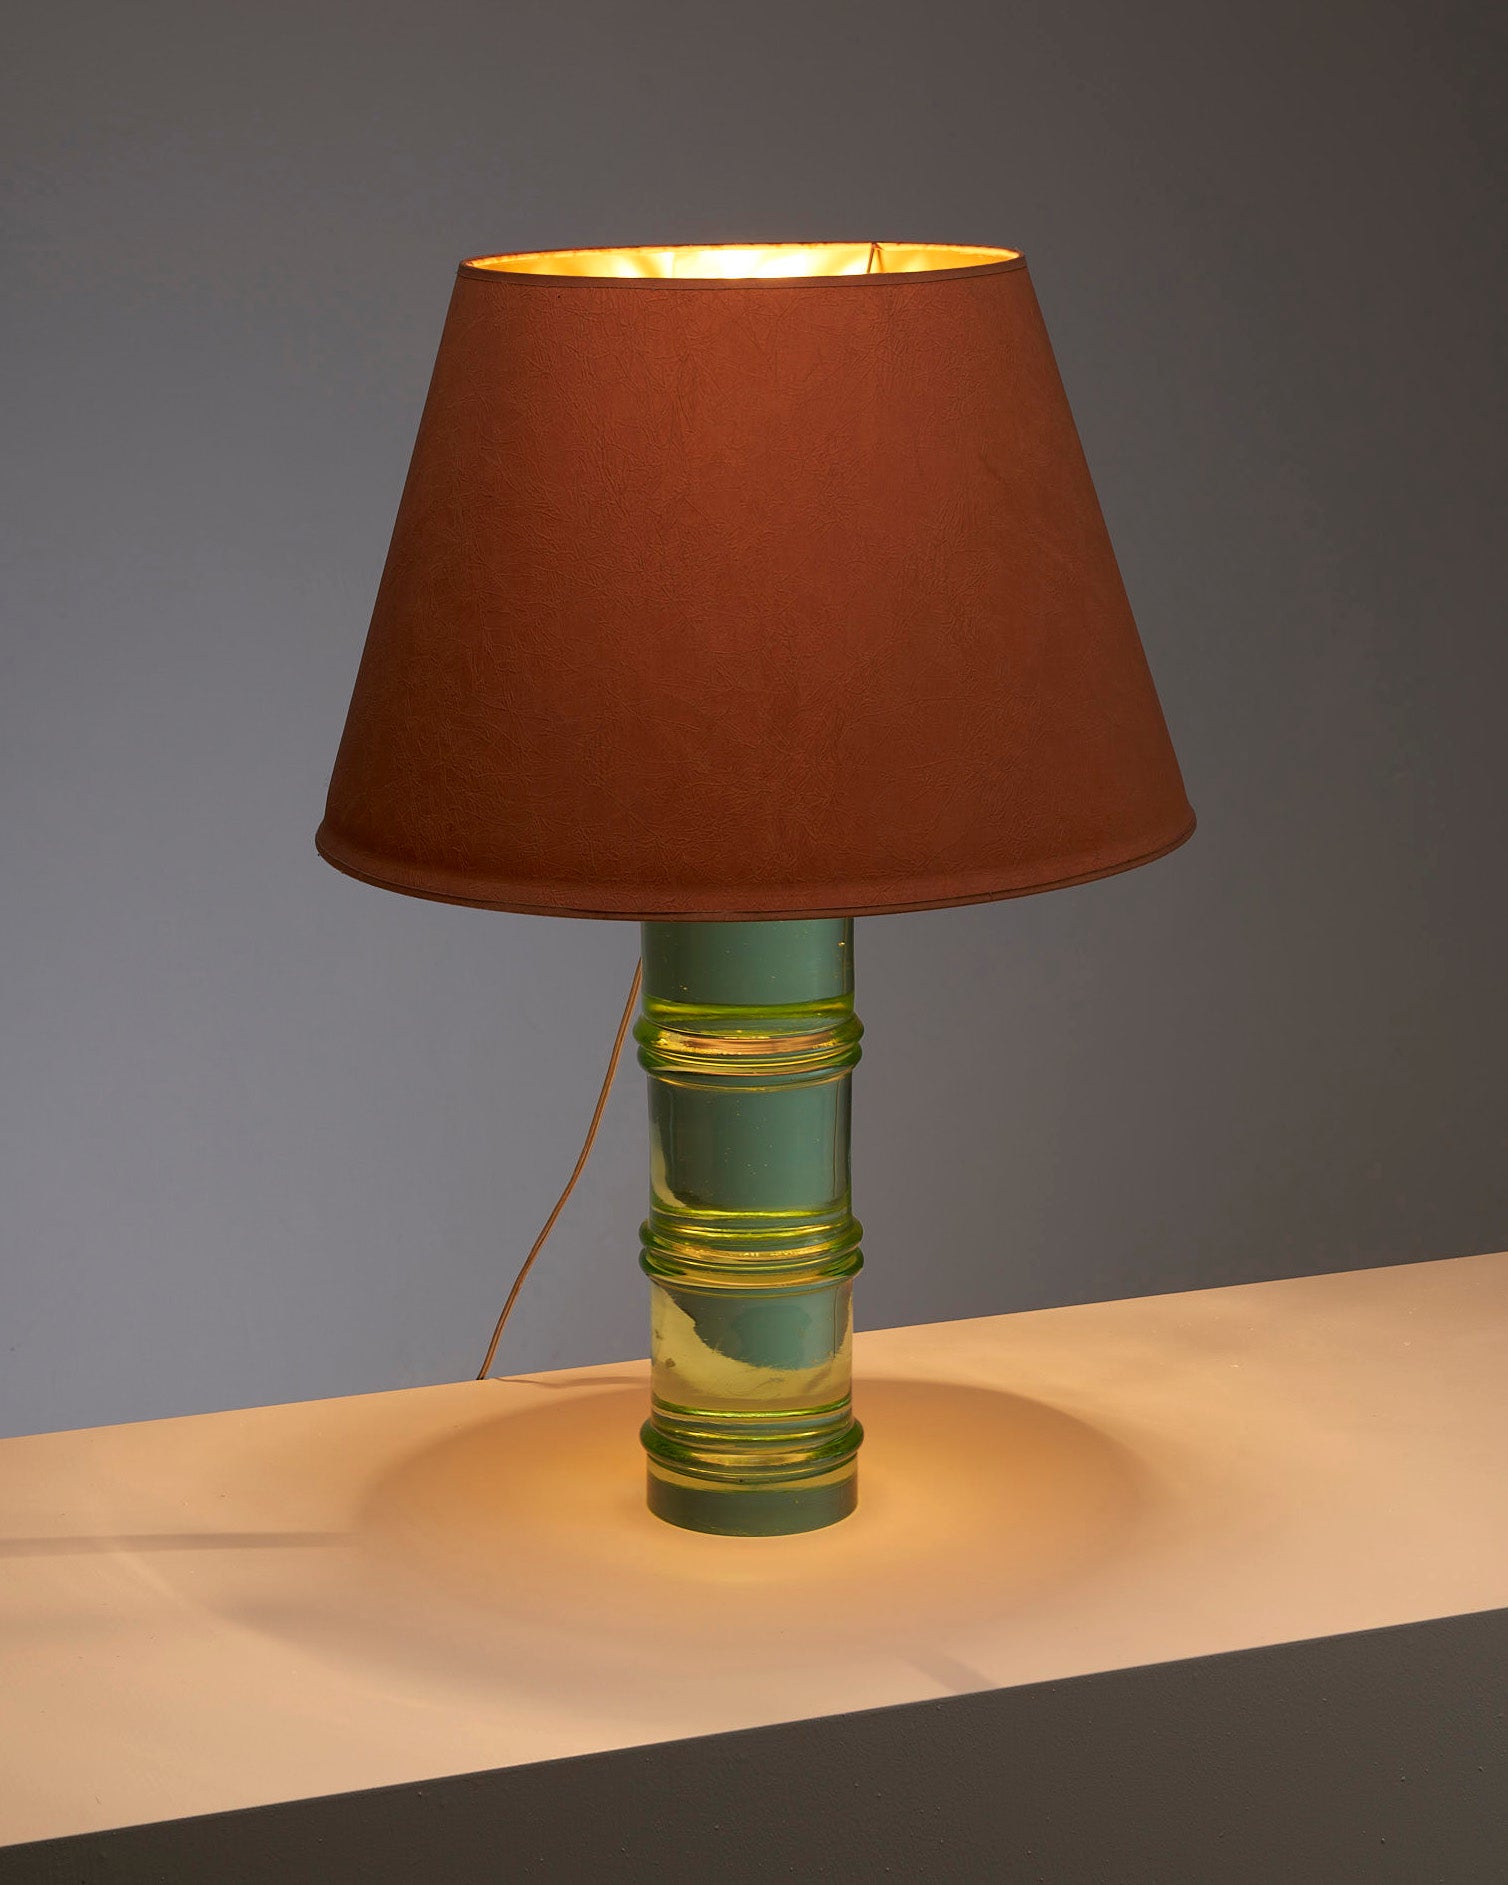 Solid glass table lamp with orange lampshade in the manner of Fontana Arte or Venini